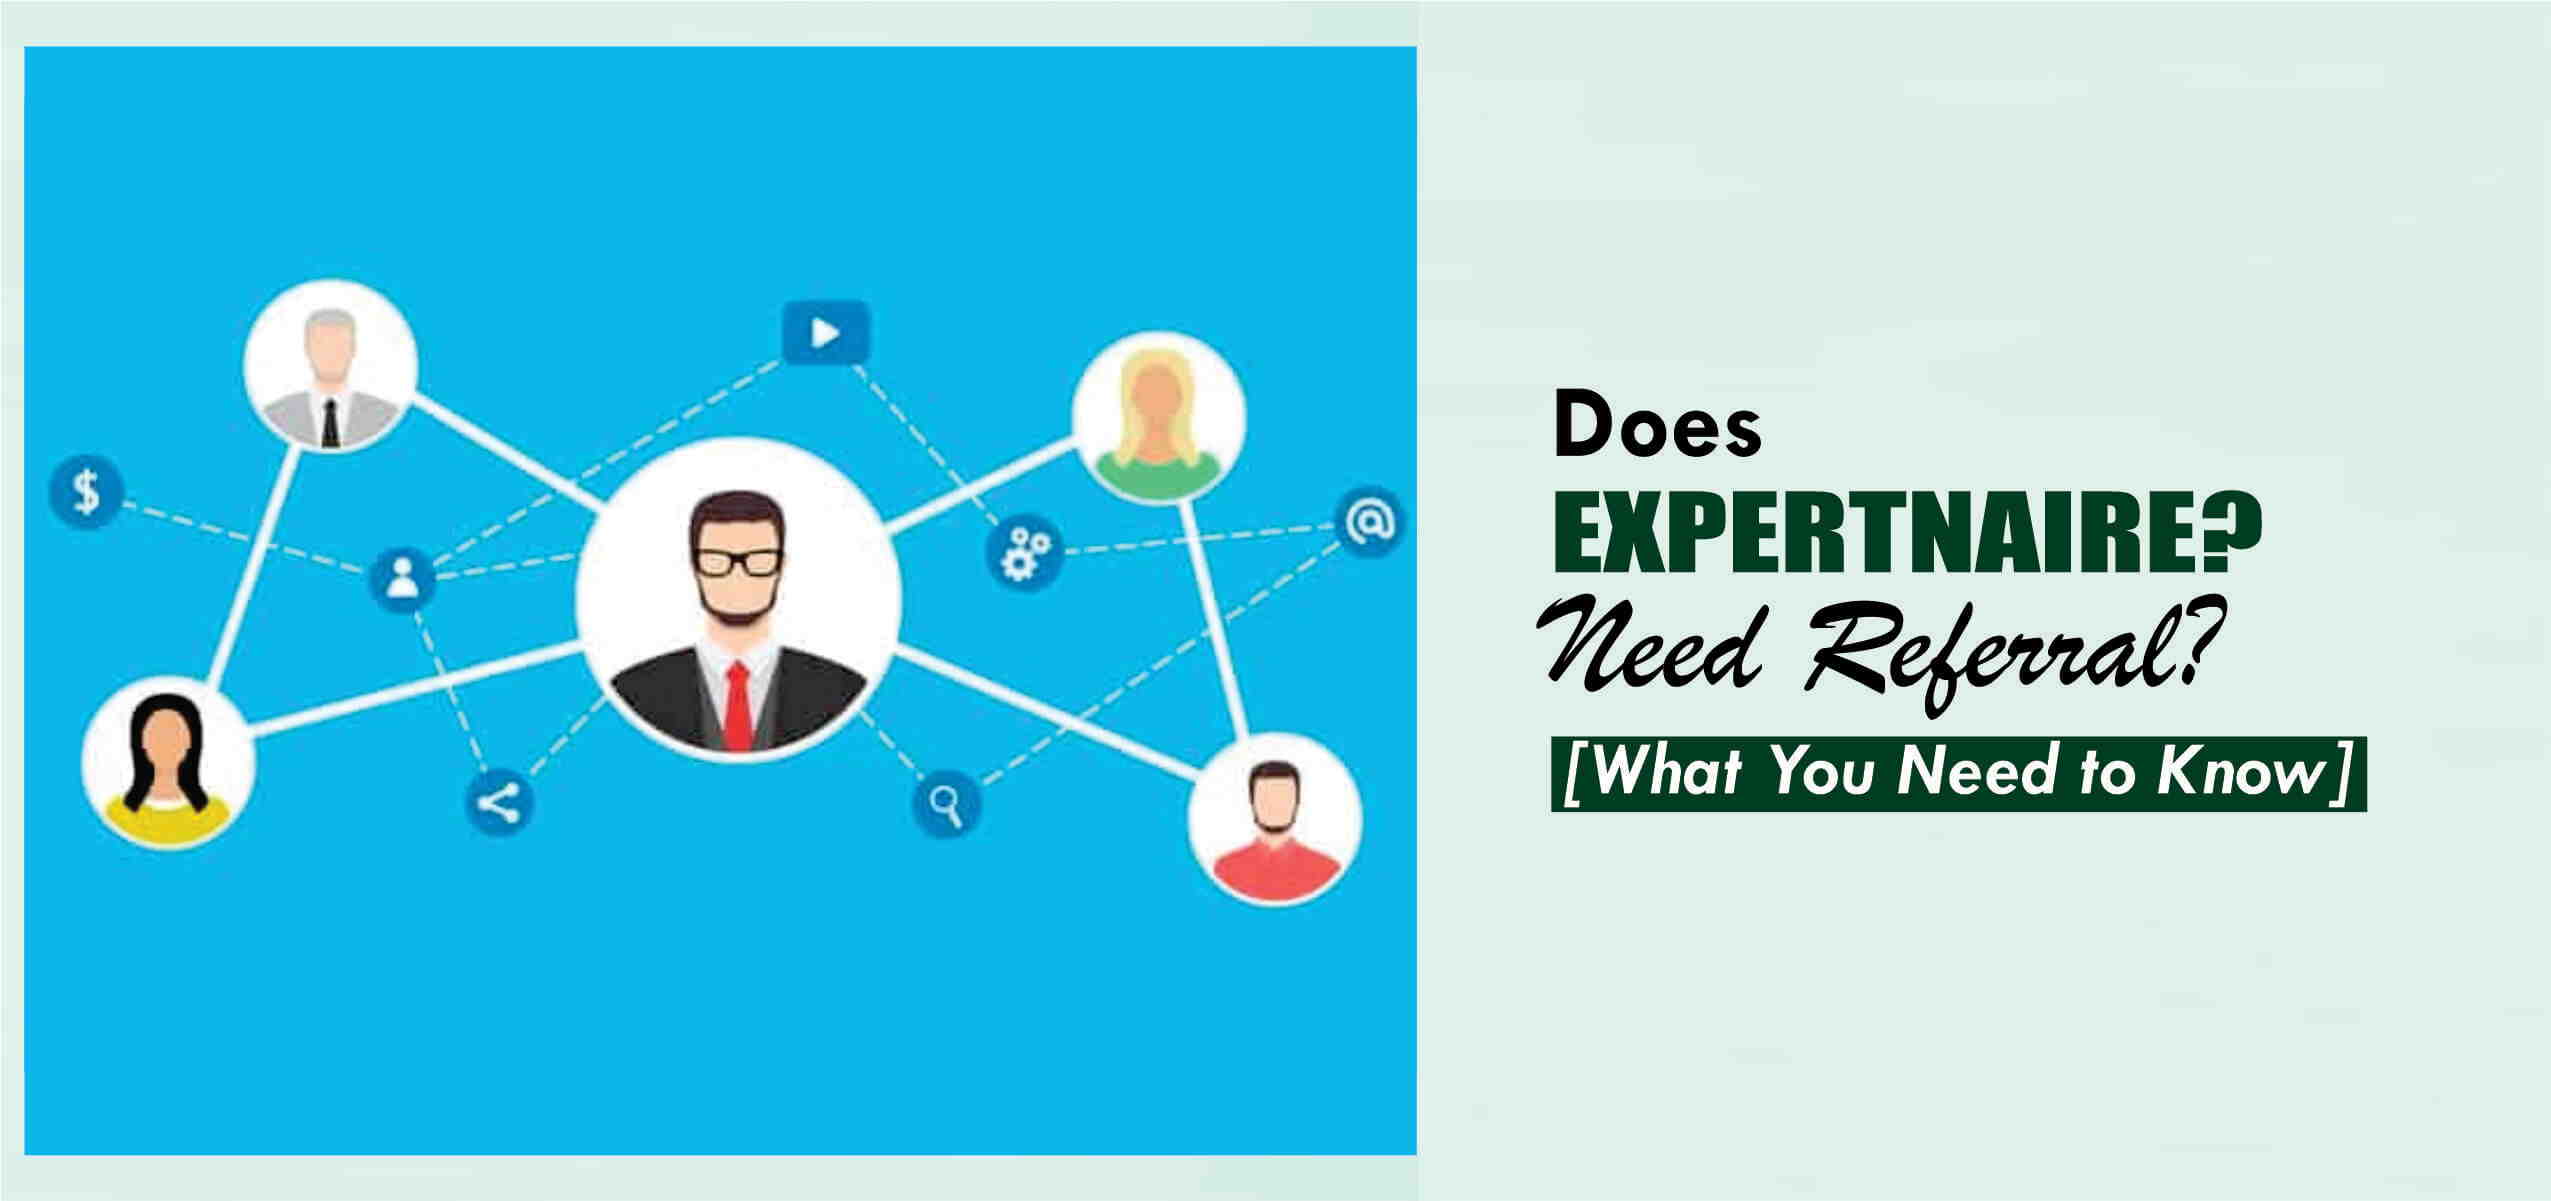 Does Expertnaire need referral